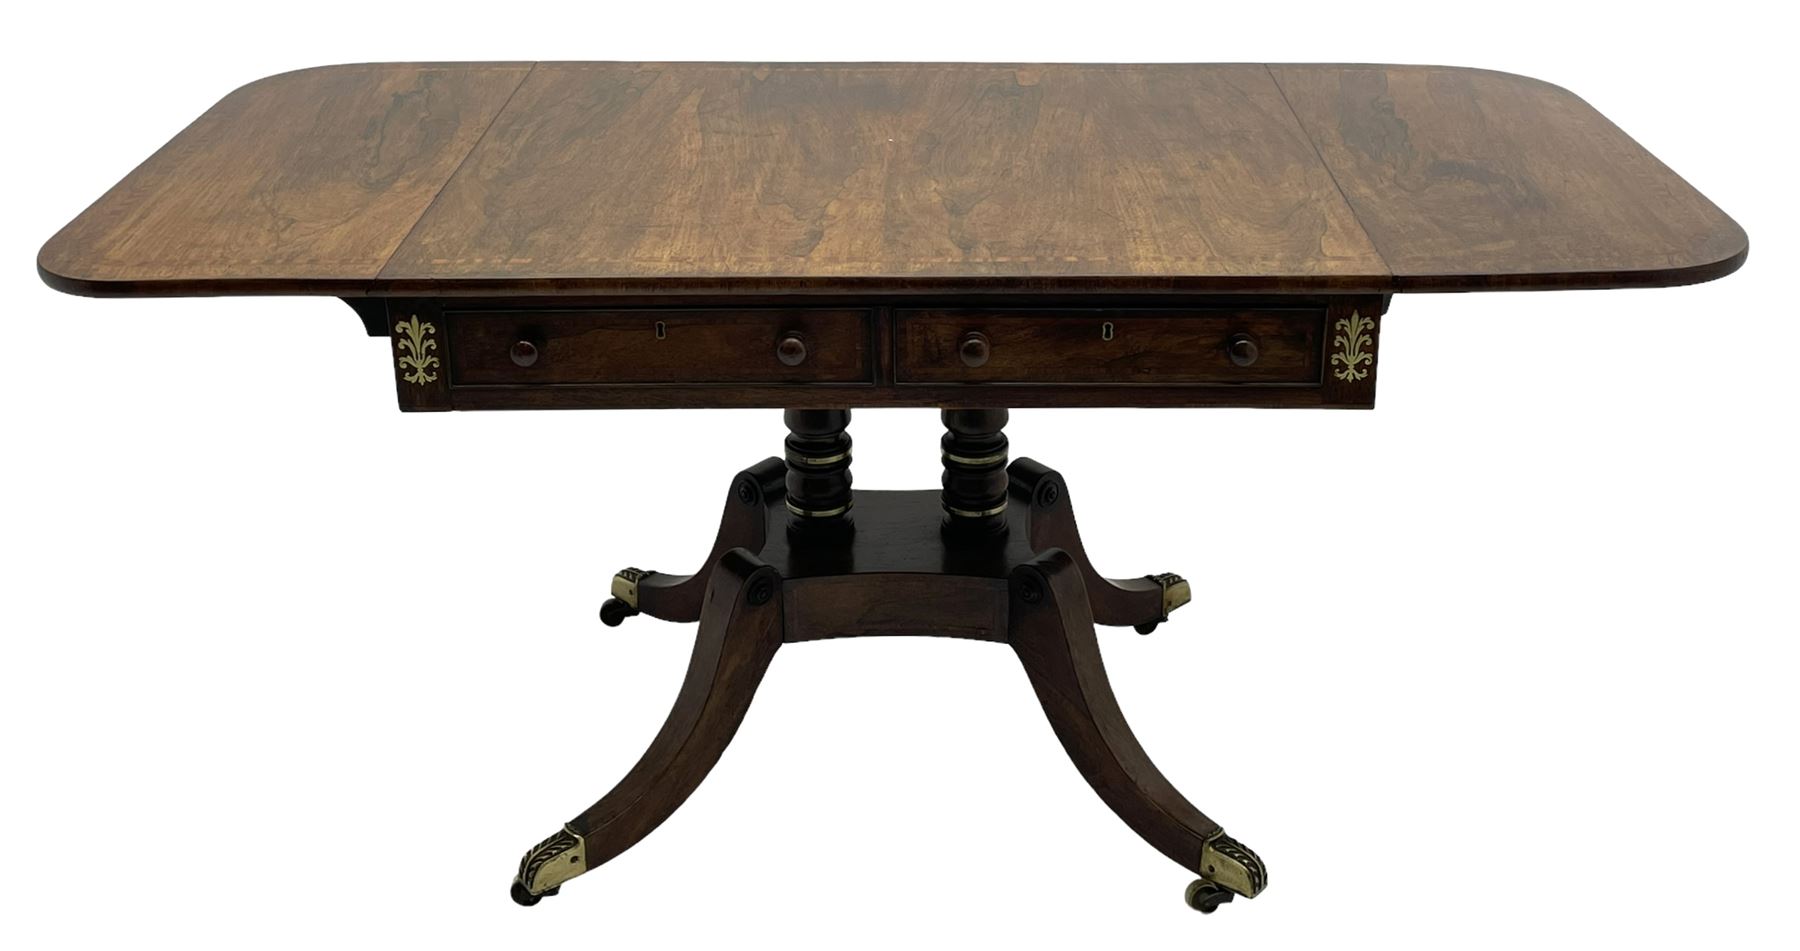 Regency rosewood and brass inlaid sofa table - Image 3 of 11